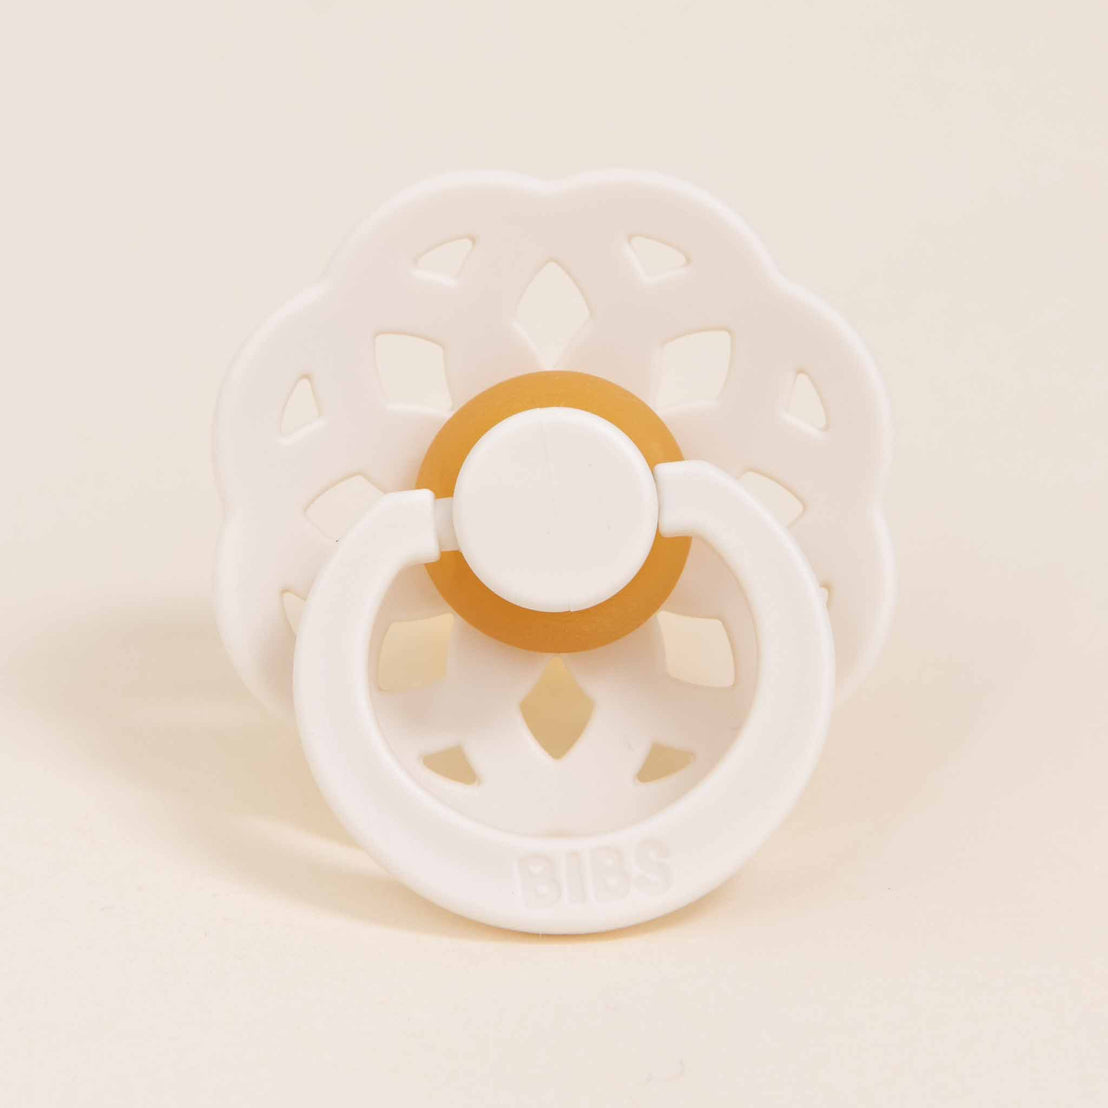 A Isabella Pacifier in Ivory with a floral pattern around the shield and the brand "bibs" embossed at the center, designed for baptism ceremonies.